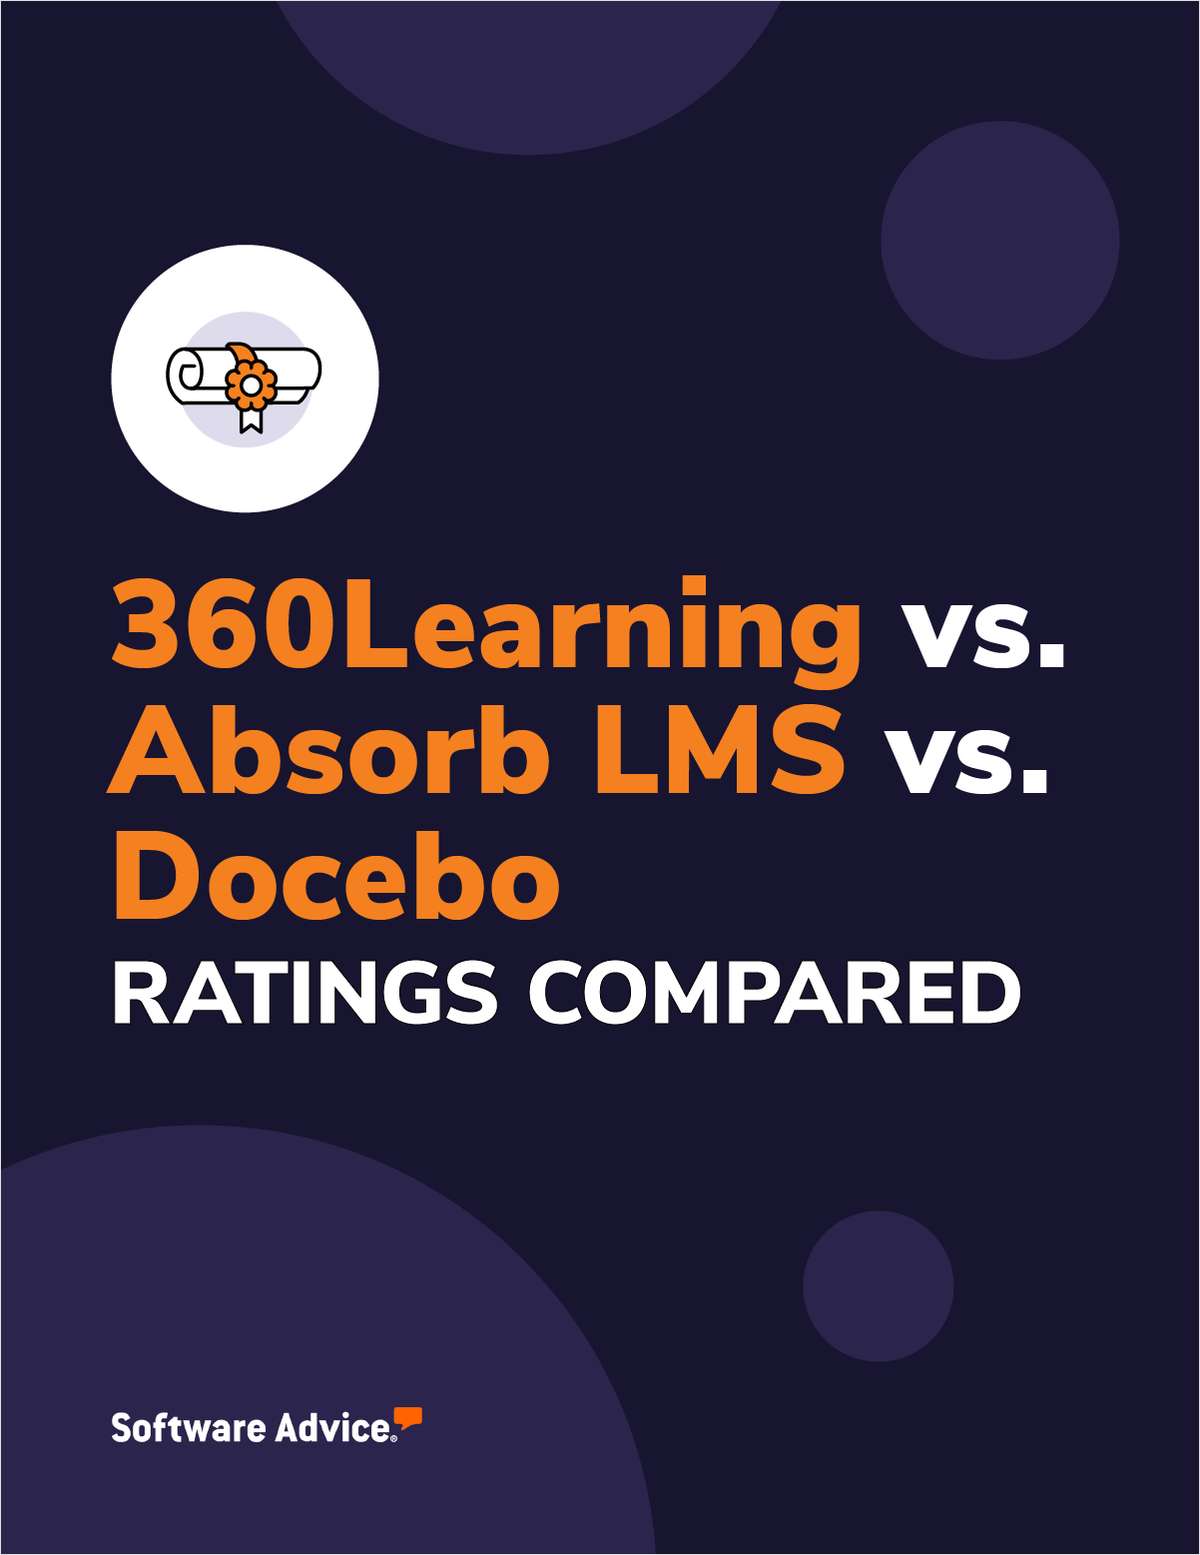 360Learning vs. Absorb LMS vs. Docebo Ratings Compared